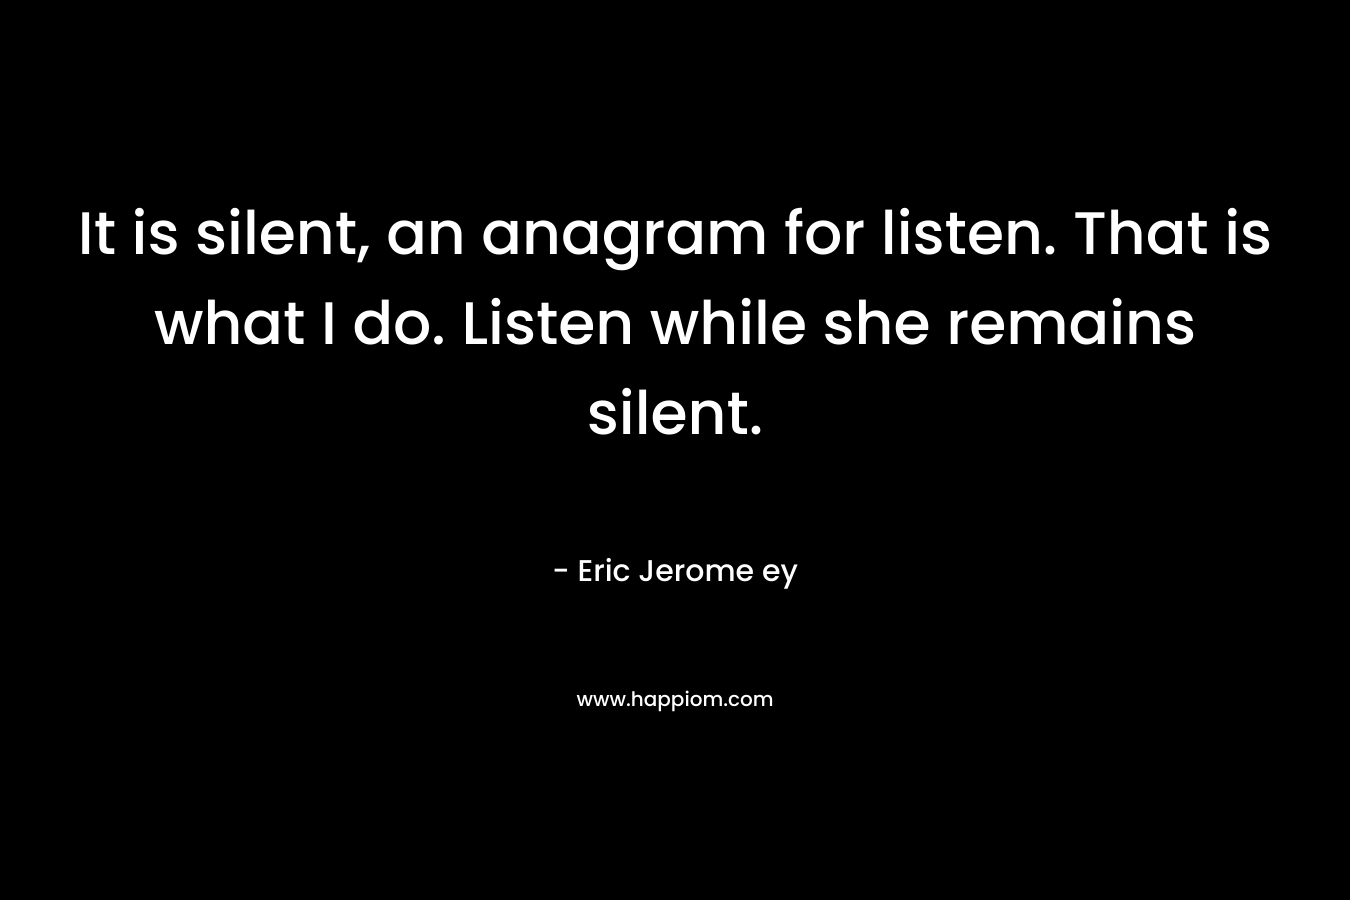 It is silent, an anagram for listen. That is what I do. Listen while she remains silent.